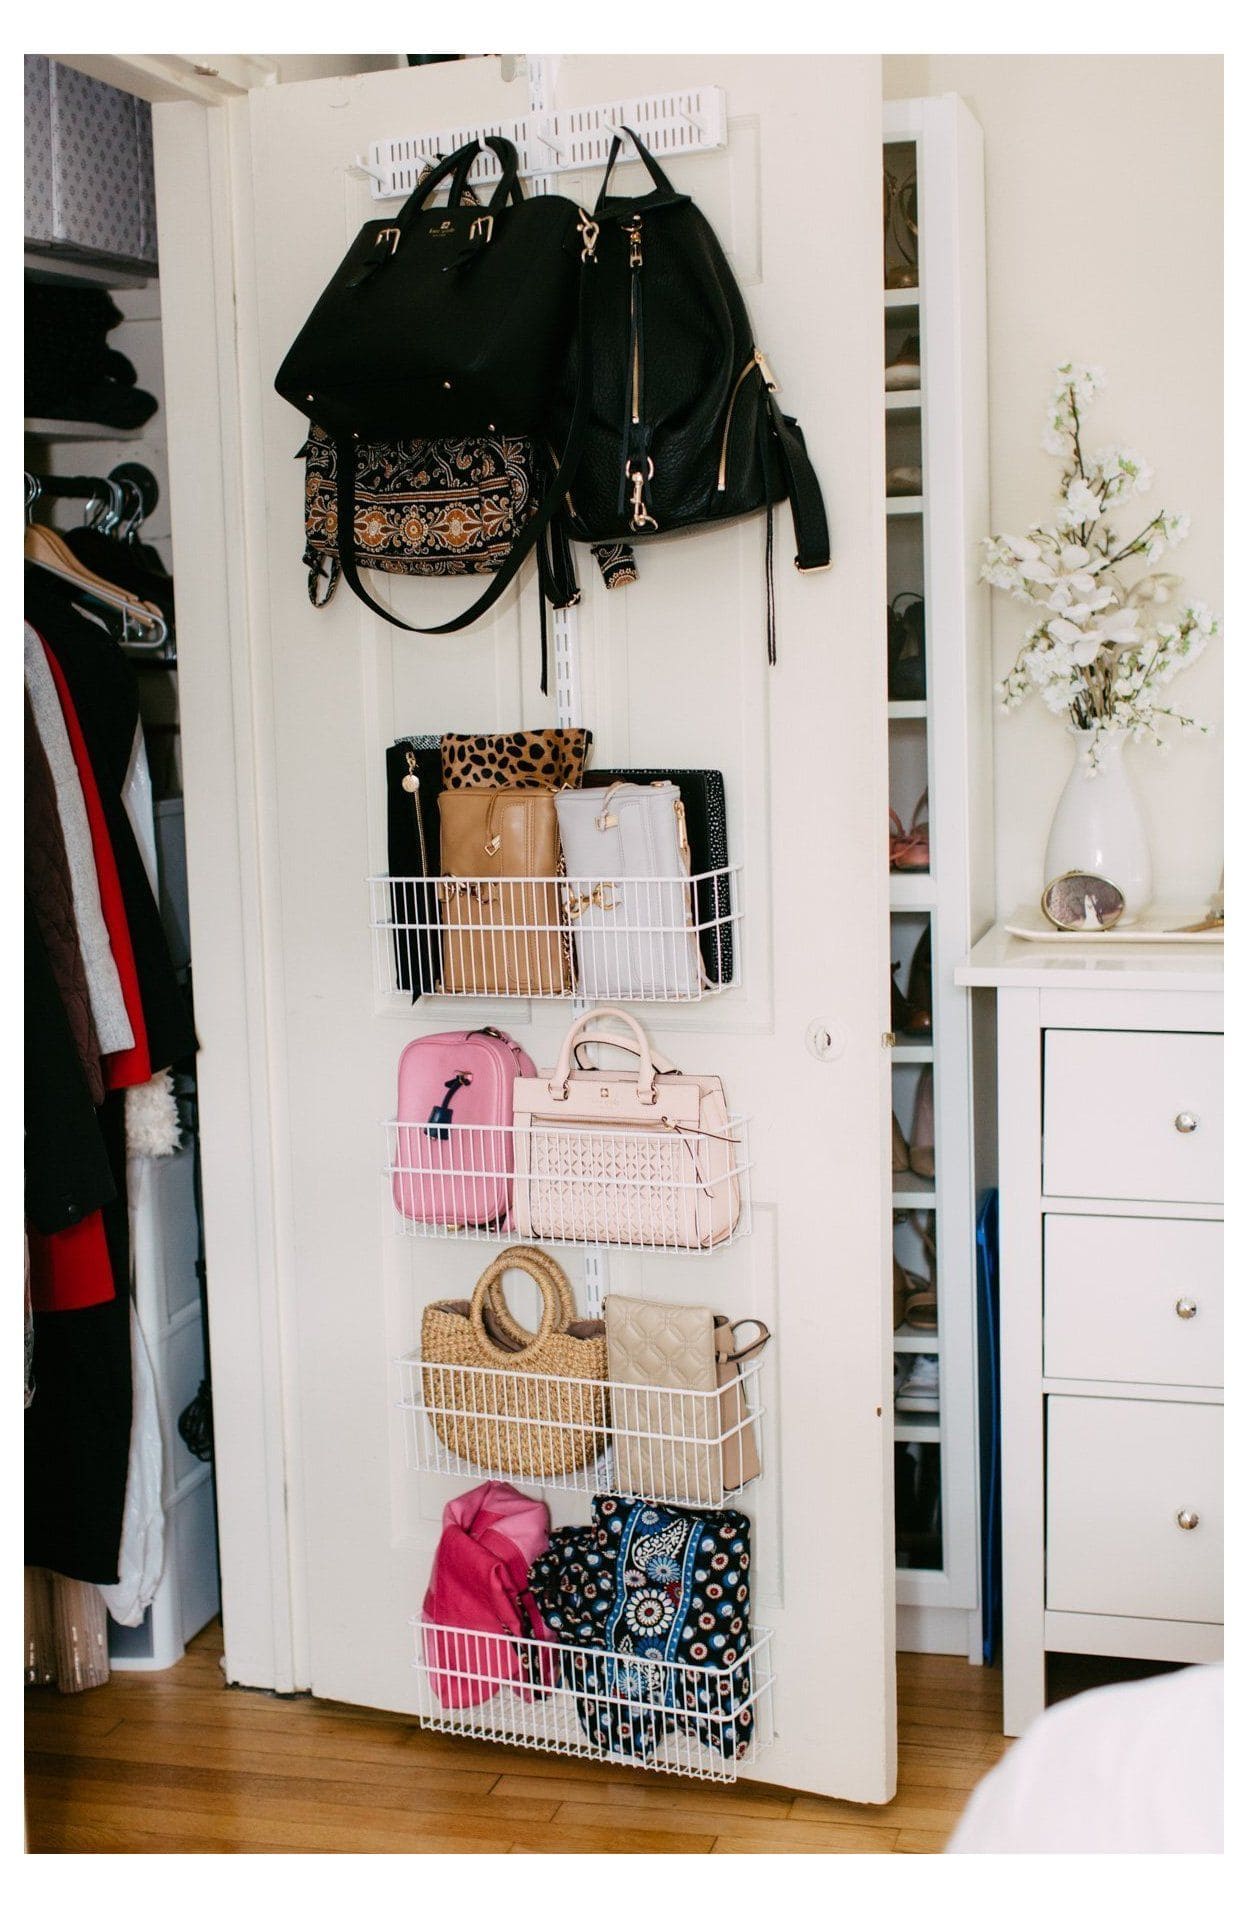 20 fascinating over the door storage ideas to put in your bag - 133